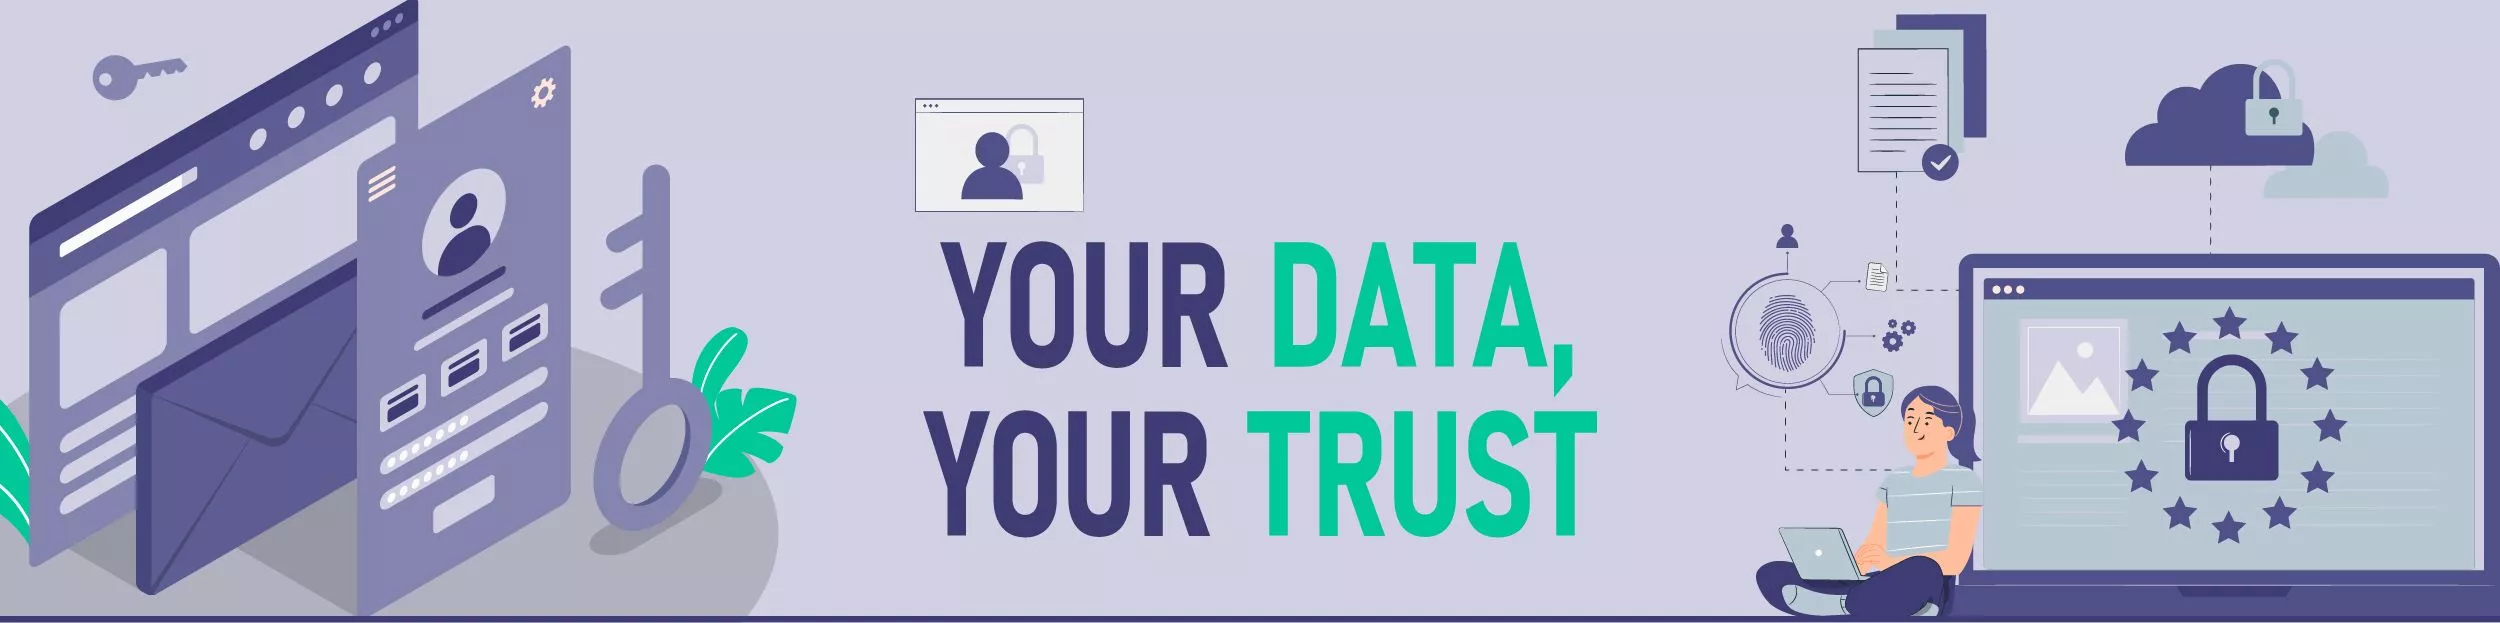 Your Data, Your Trust